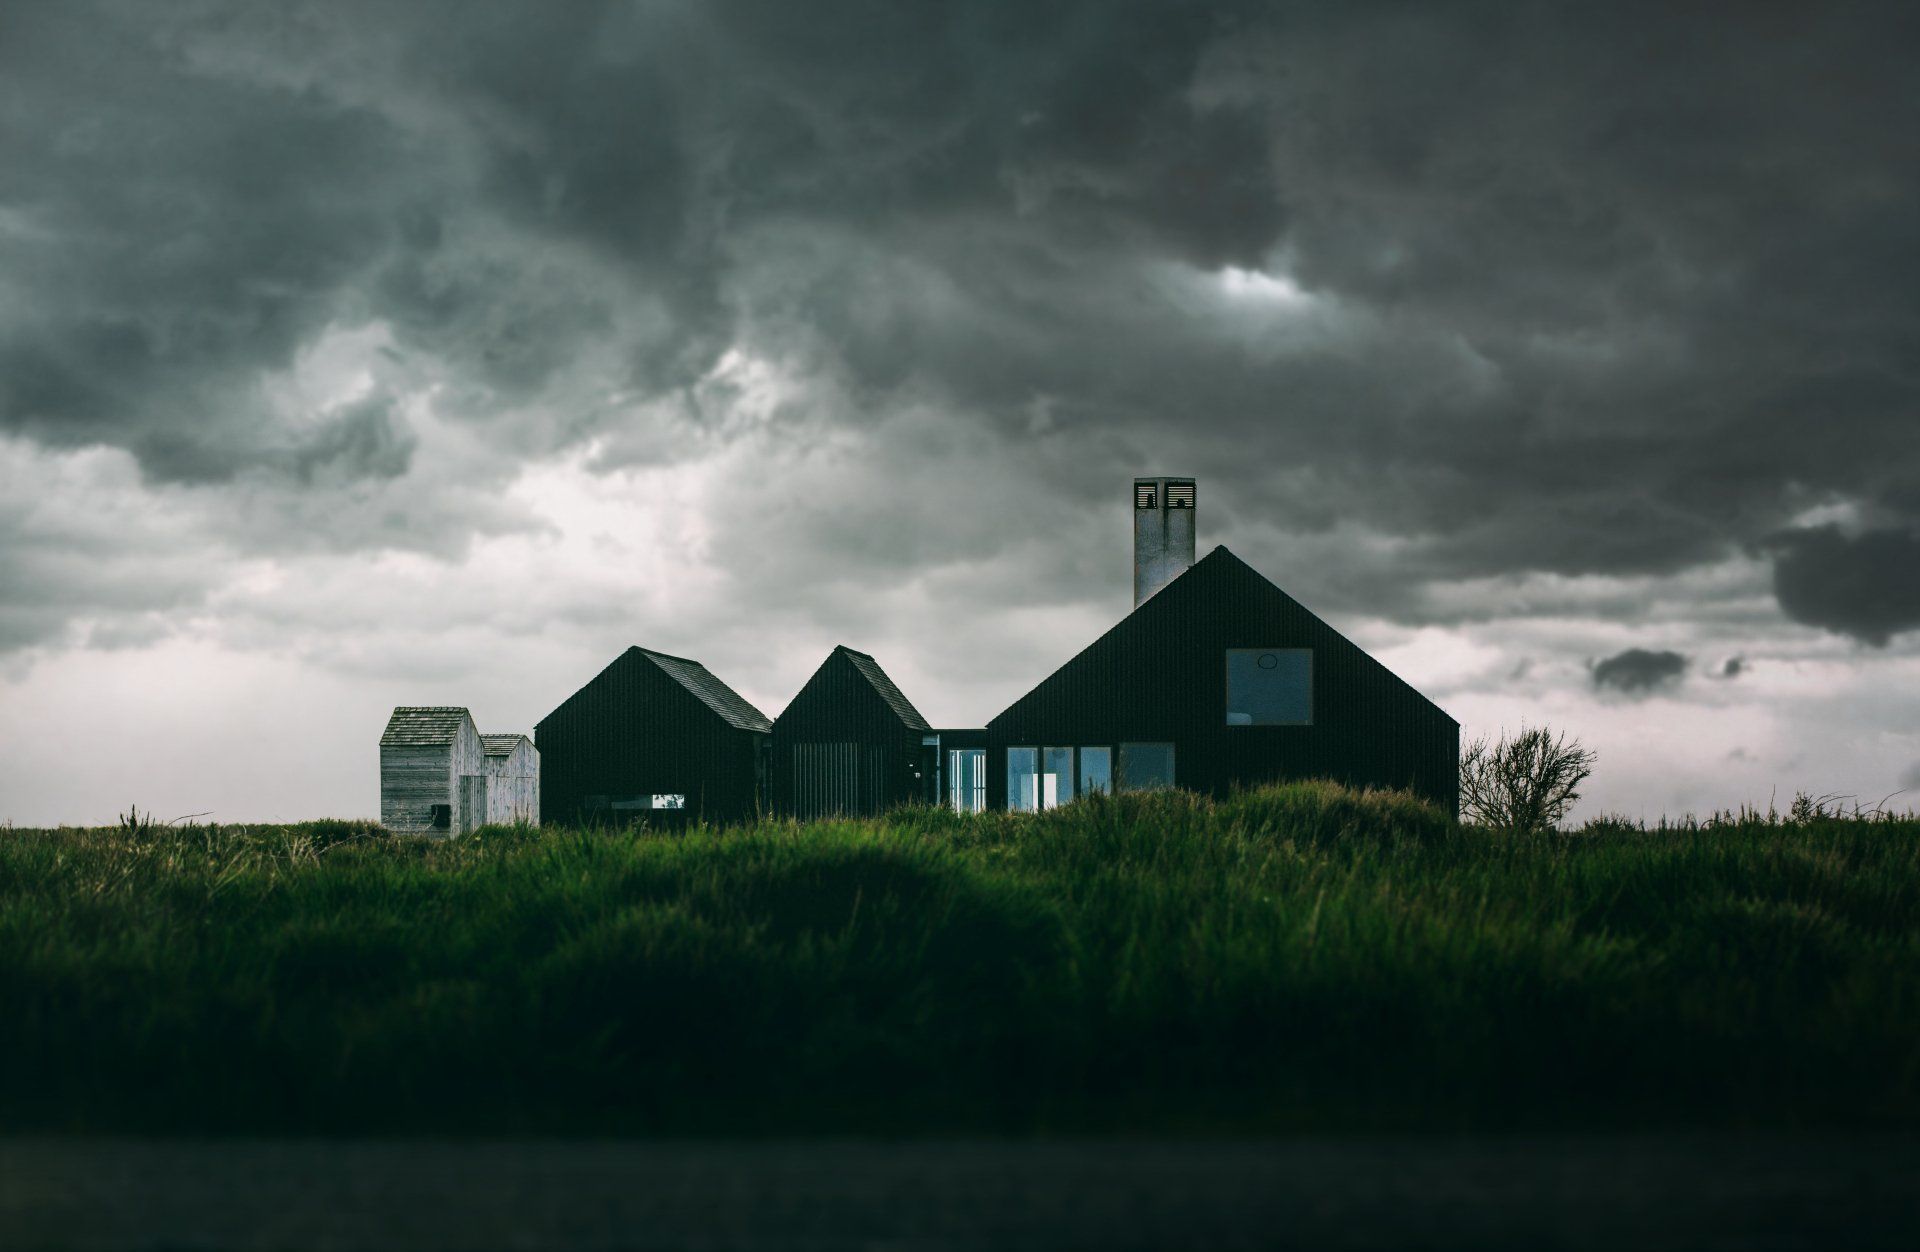 Protect your home from storms